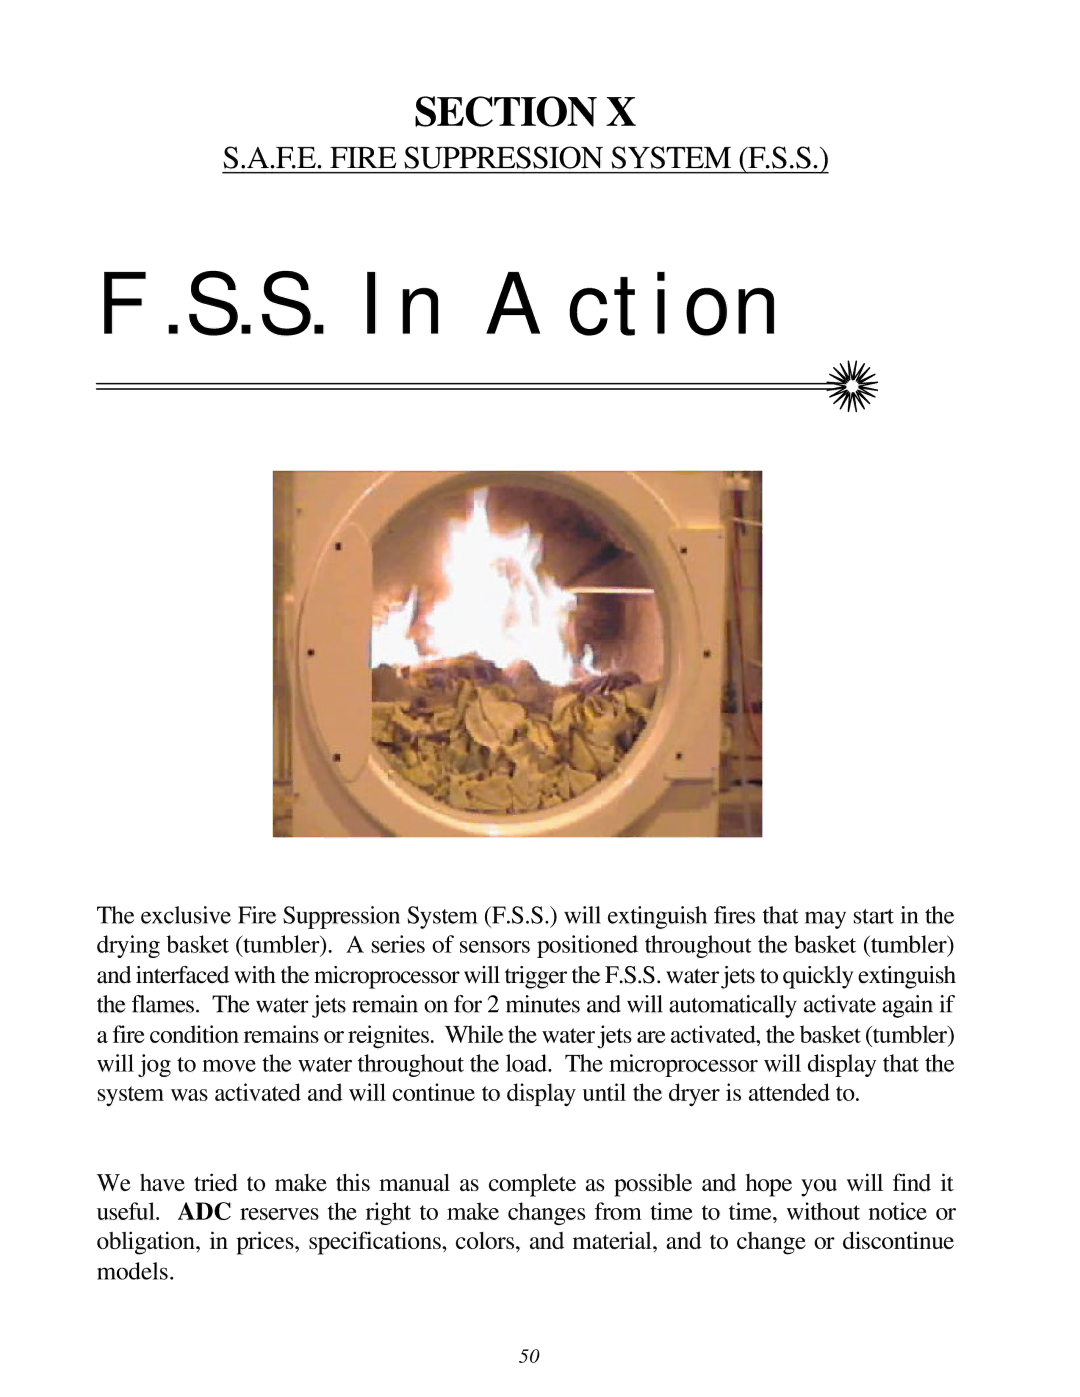 American Dryer Corp D-40 installation manual S. In Action, F.E. Fire Suppression System F.S.S 